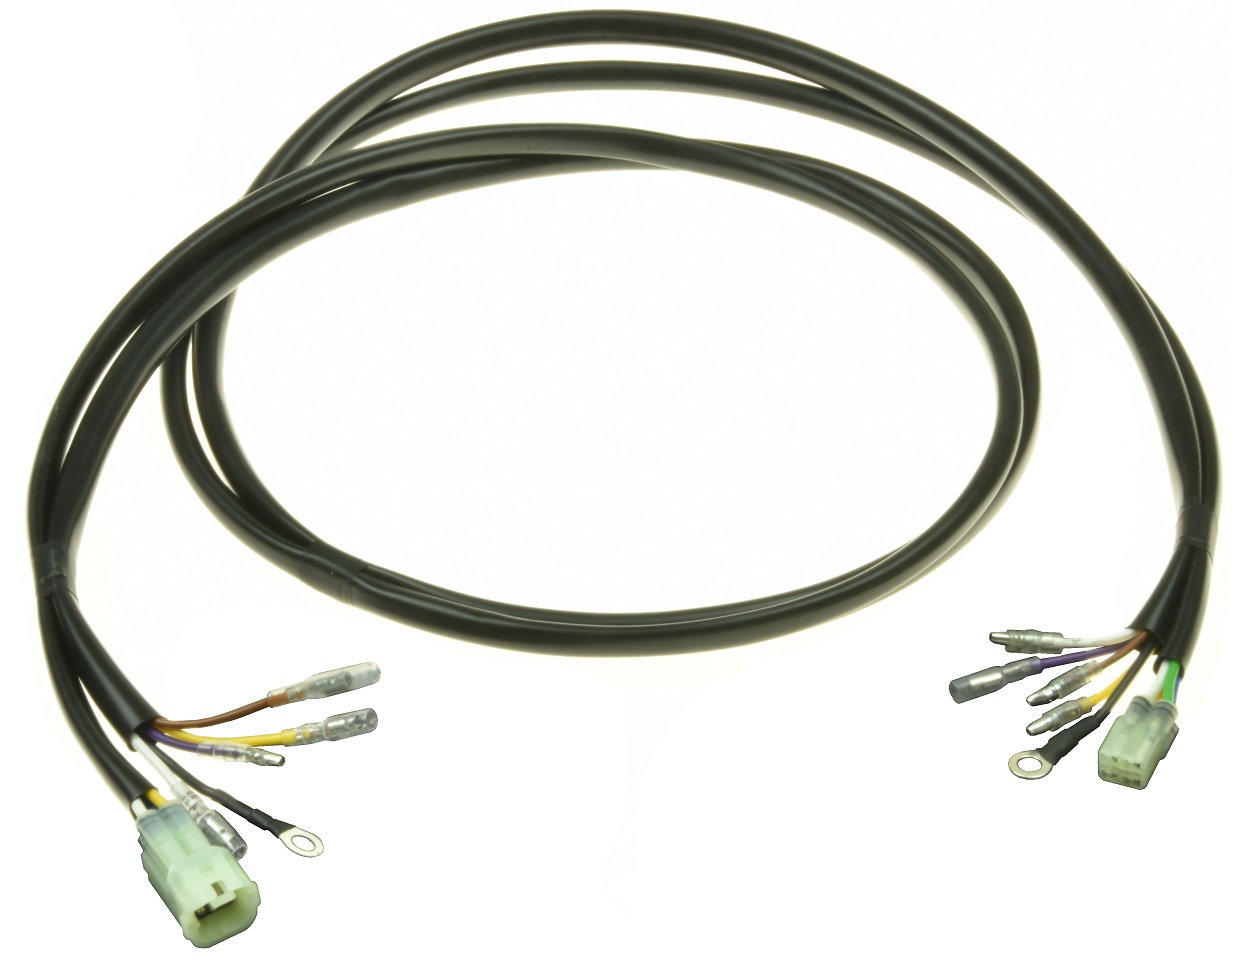 Rotax 912 CDI ignition module unit extension cable, wiring harness 965-358 - Click Image to Close